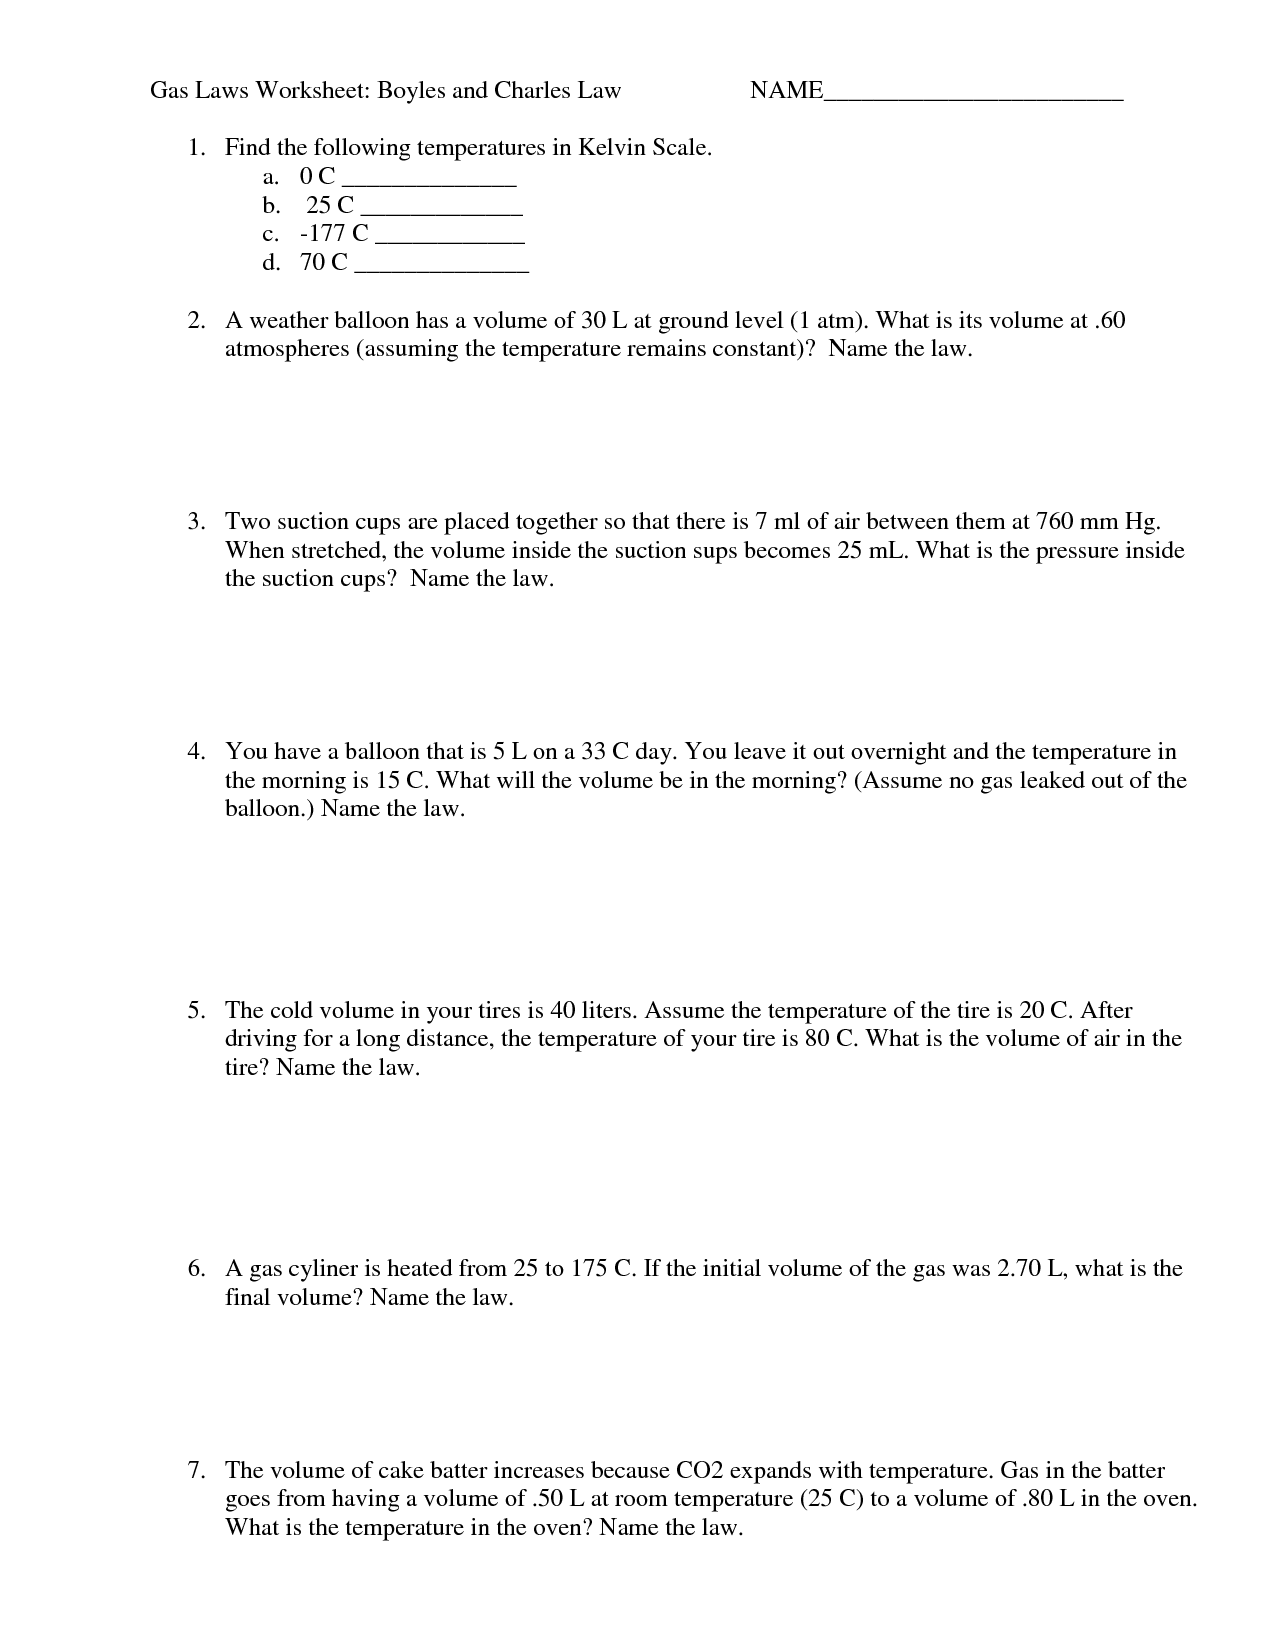 14-best-images-of-boyle-s-law-worksheet-answers-ideal-gas-law-worksheet-answer-key-boyle-s